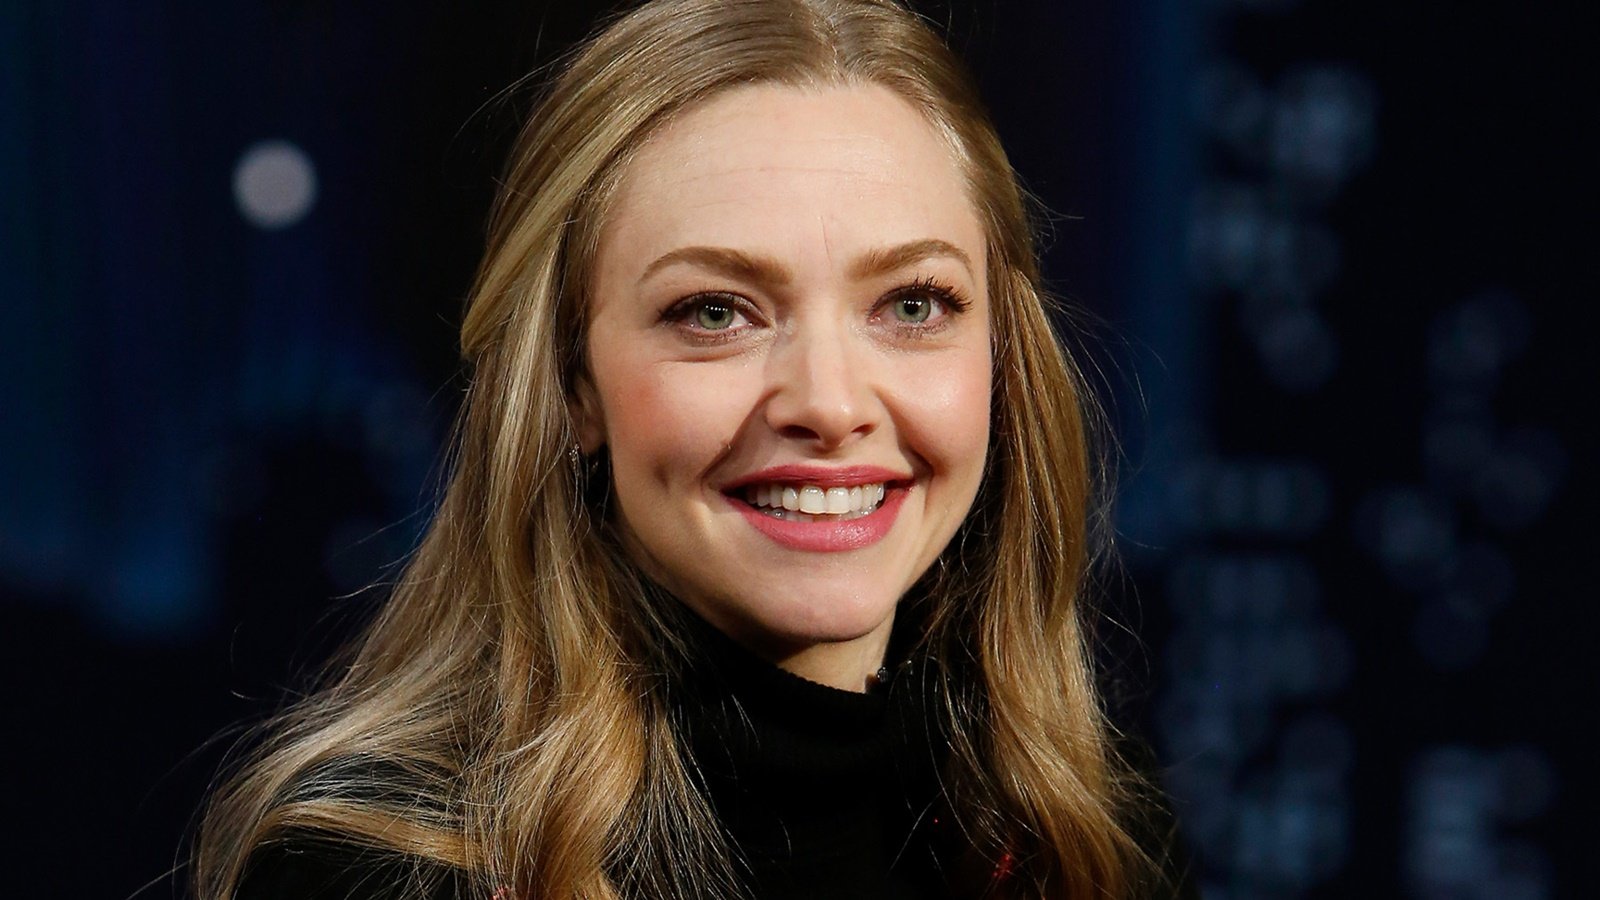 Amanda Seyfried is ready to return as a comedy star, but filming will have to wait